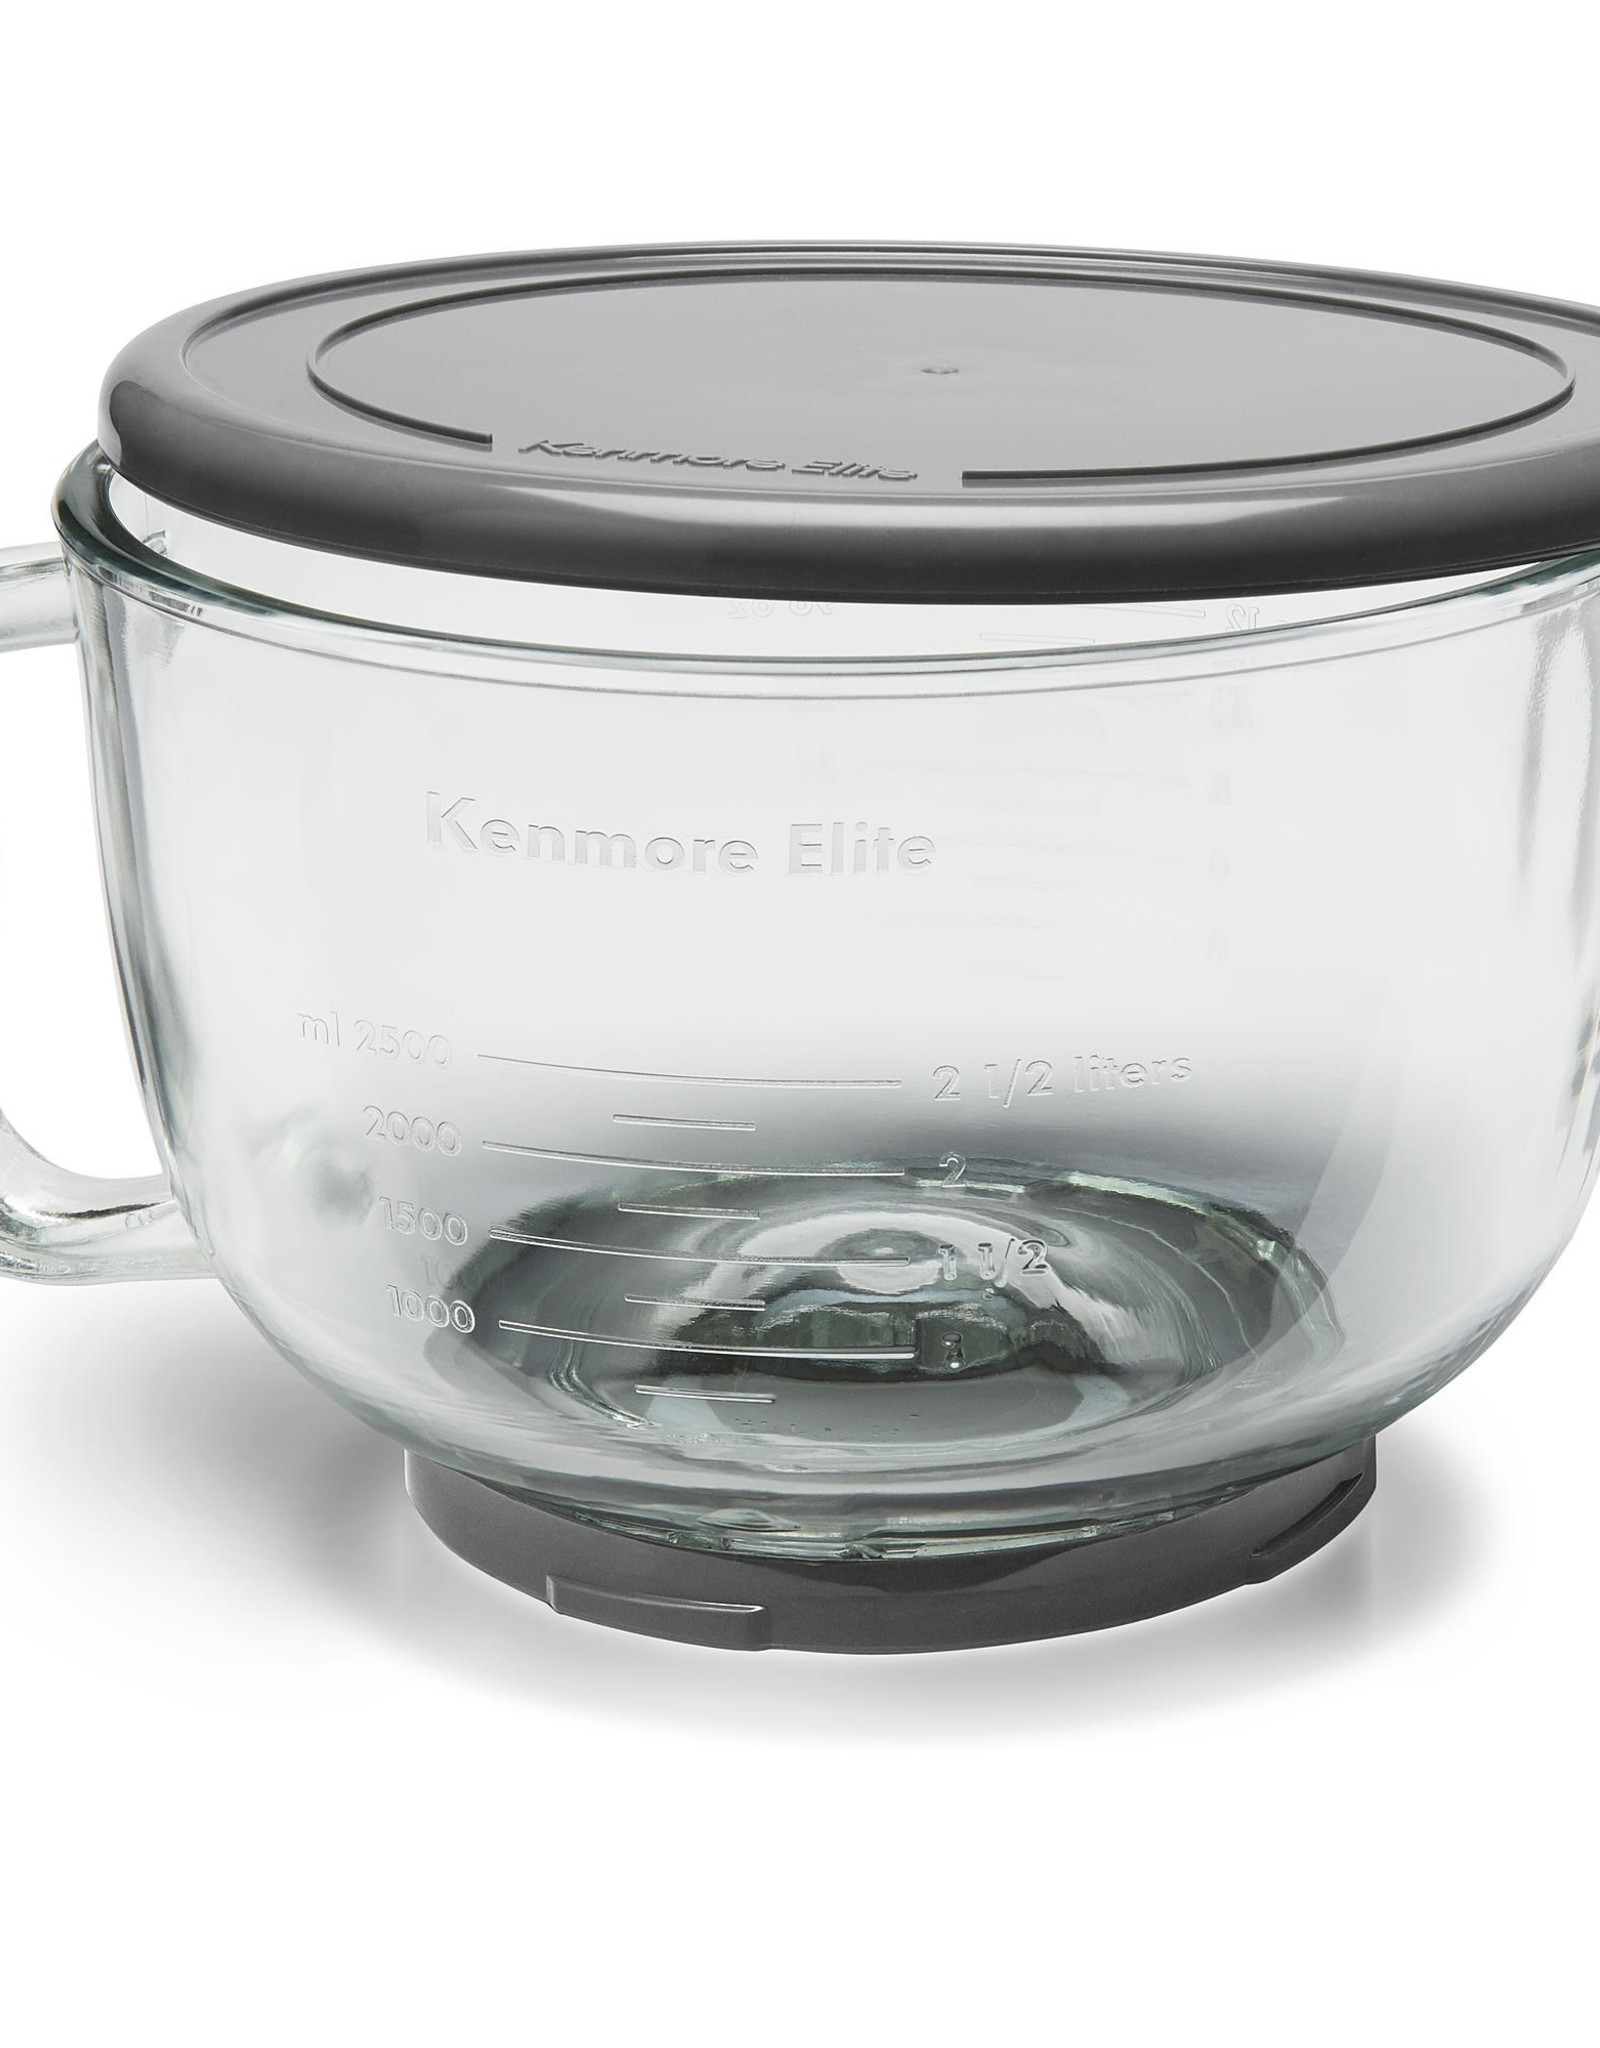 Kenmore Kenmore Ovation Stand Mixer